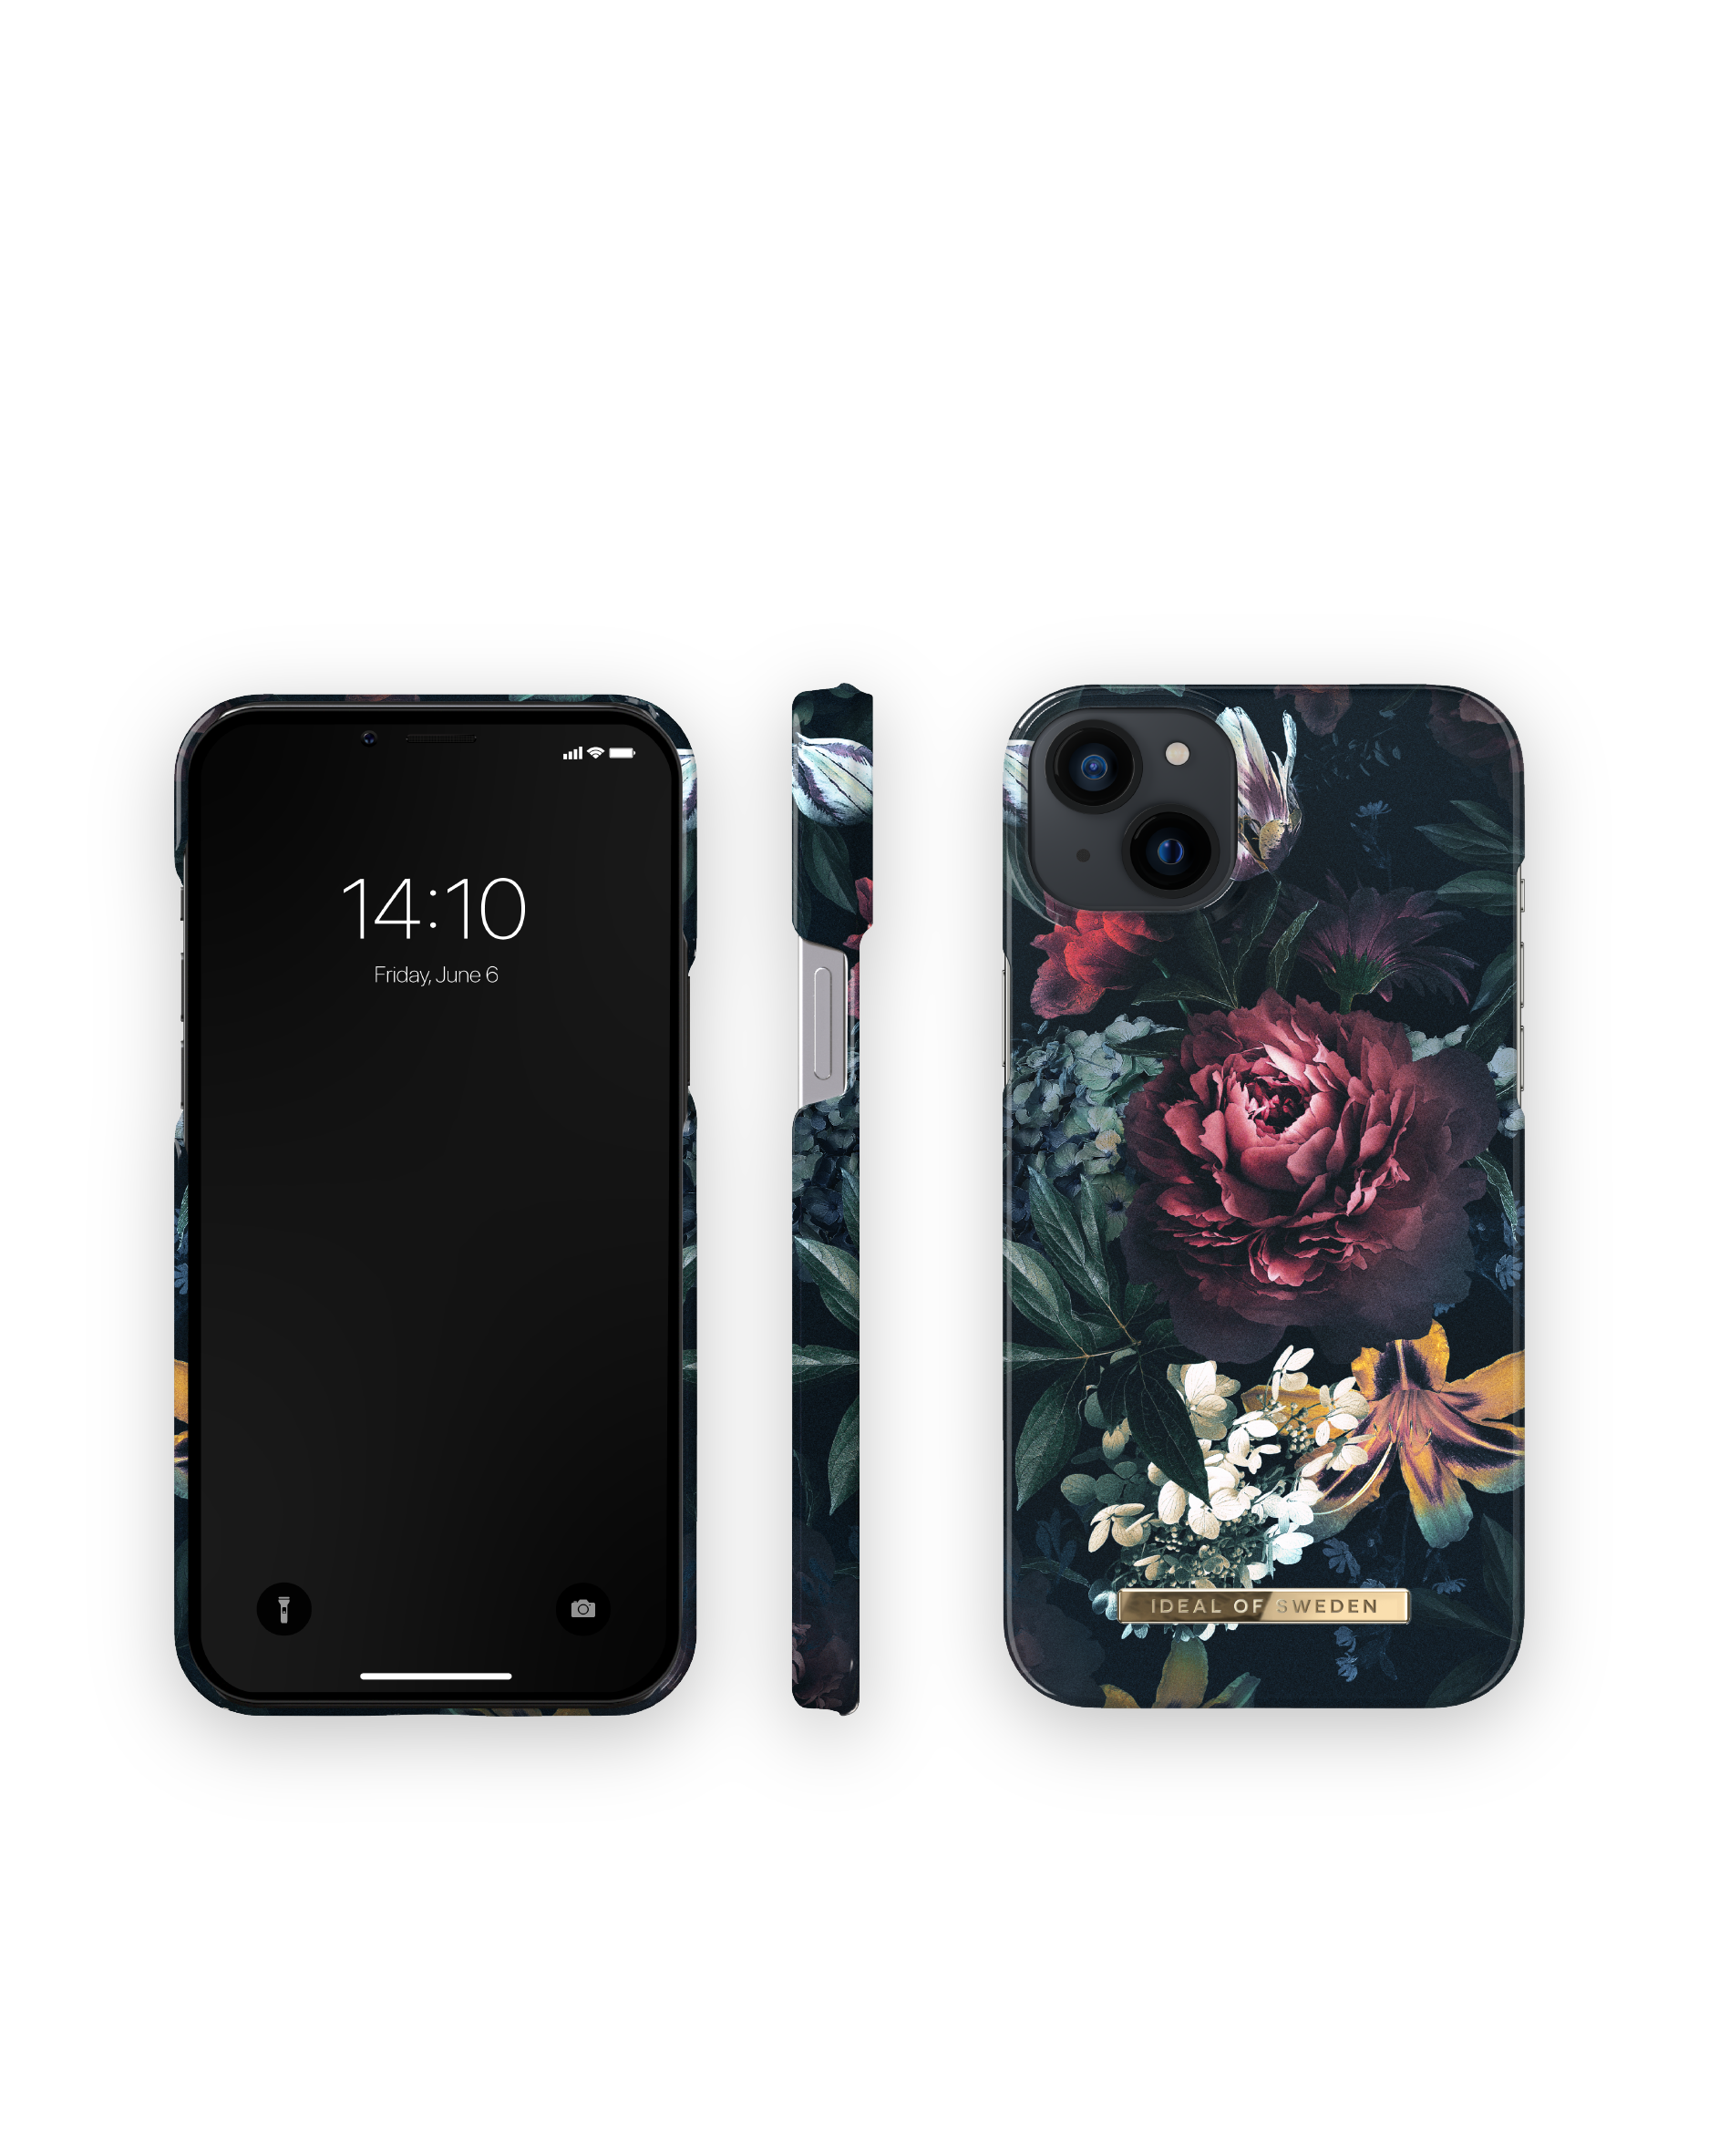 Dawn OF 14 IDFCAW21-I2267-355, Apple, SWEDEN Plus, Bloom Backcover, iPhone IDEAL